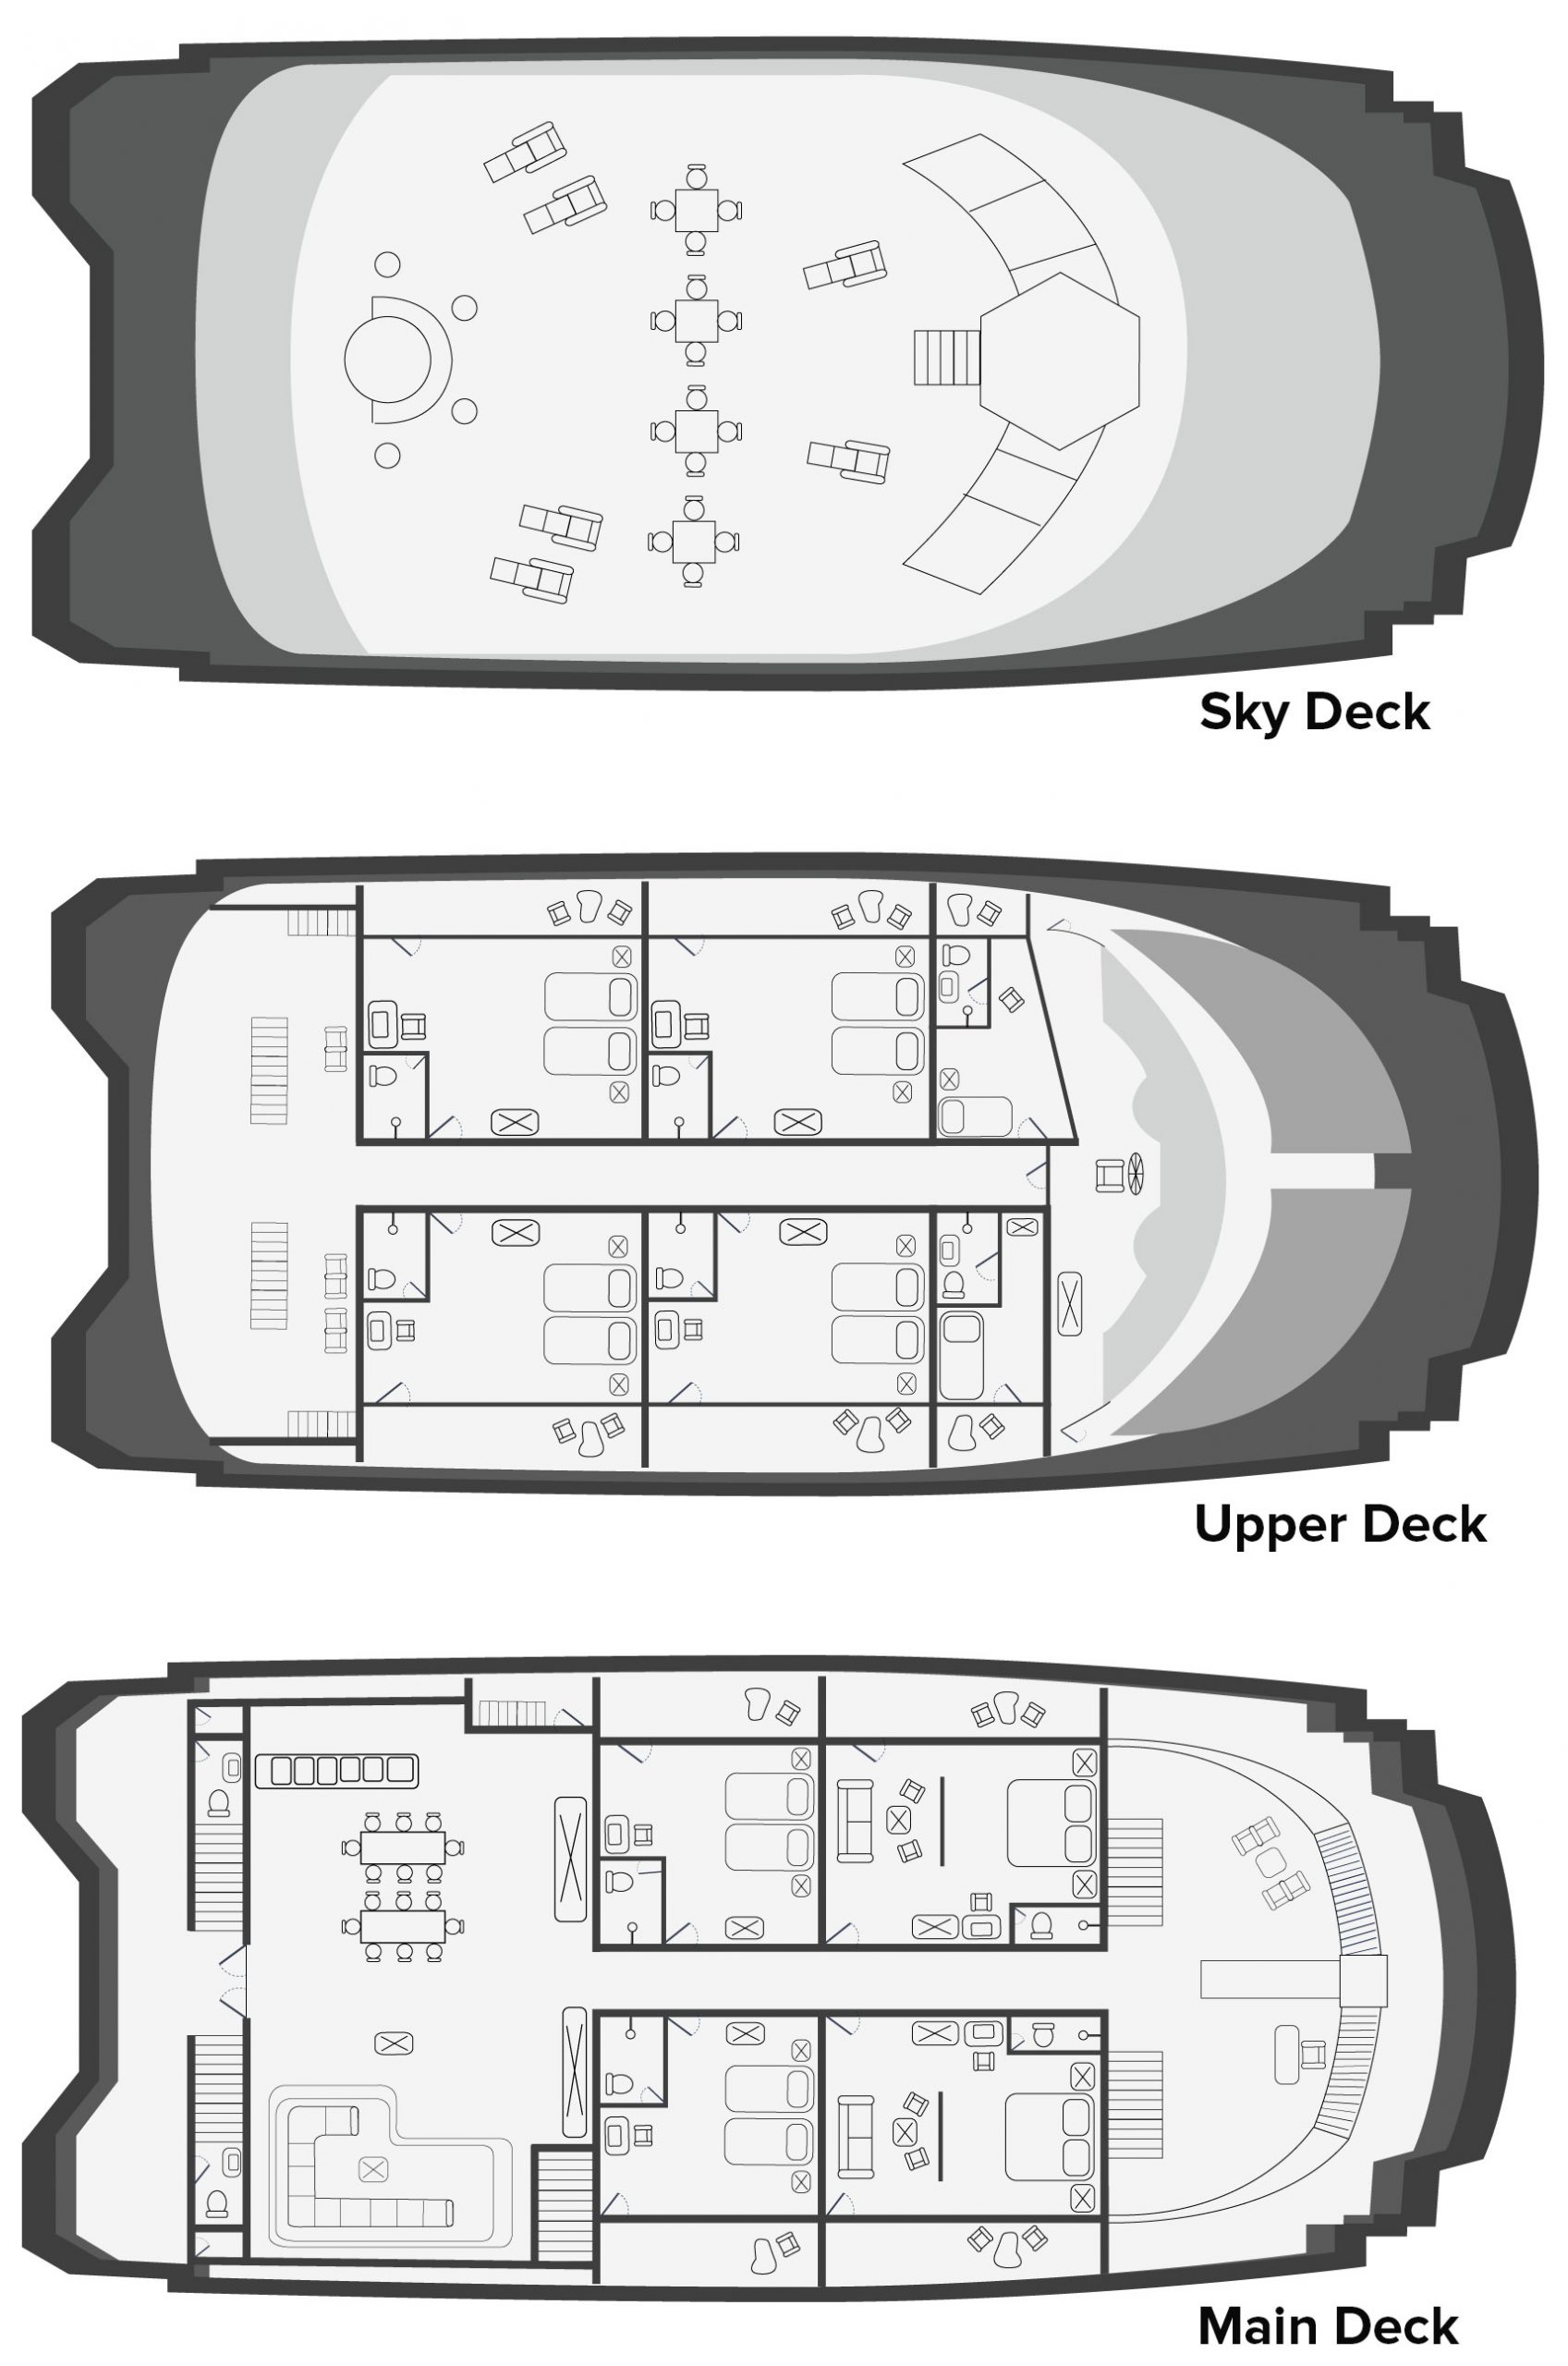 Deck plan of Petrel boat in Galapagos with 3 passenger decks, 2 double occupancy suites, 6 double occupancy cabins & 1 single occupancy cabin.